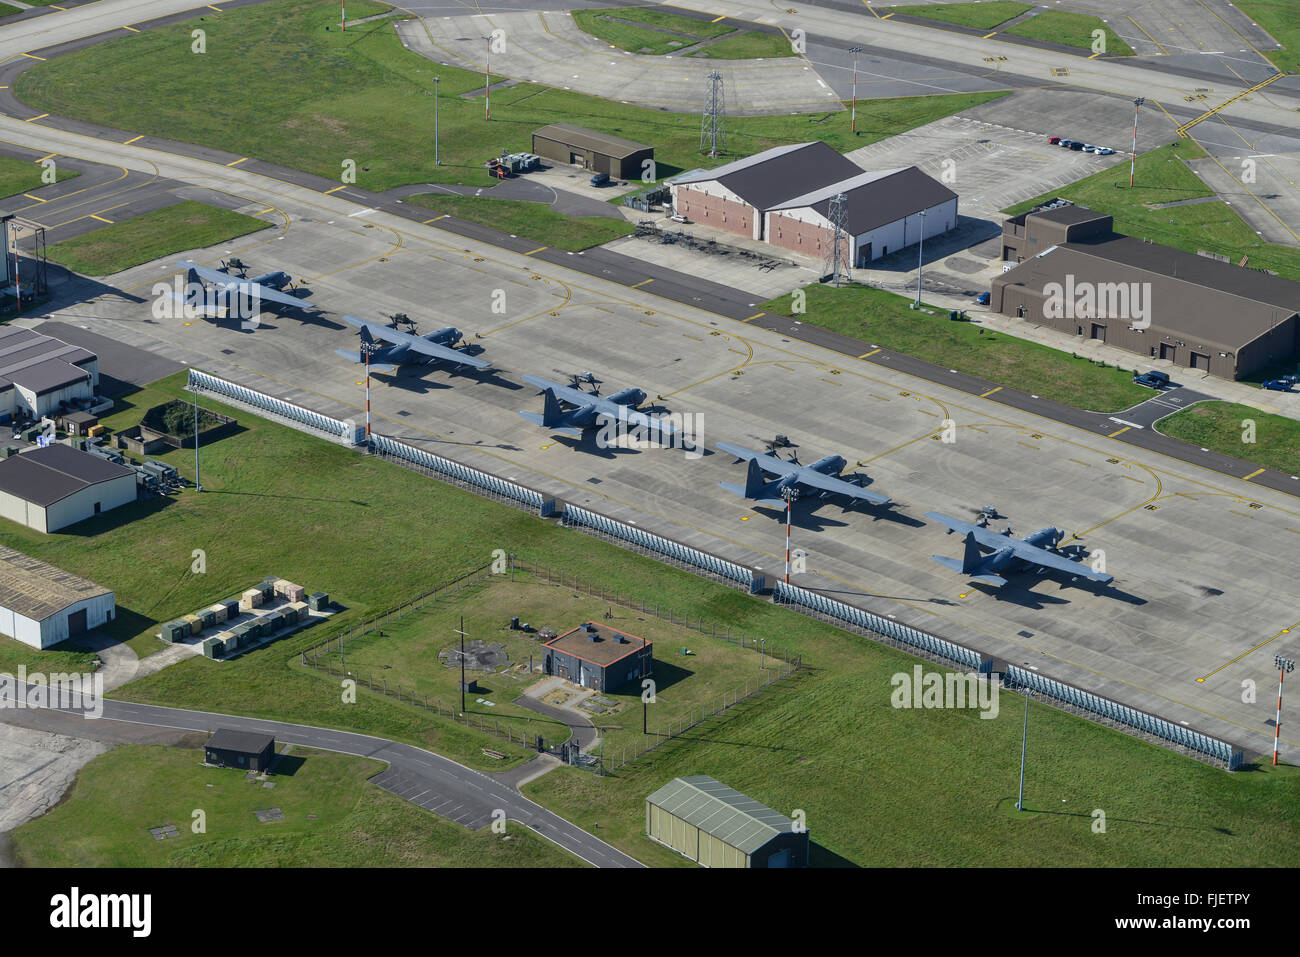 US Military aircraft on the apron of an airbase in England Stock Photo